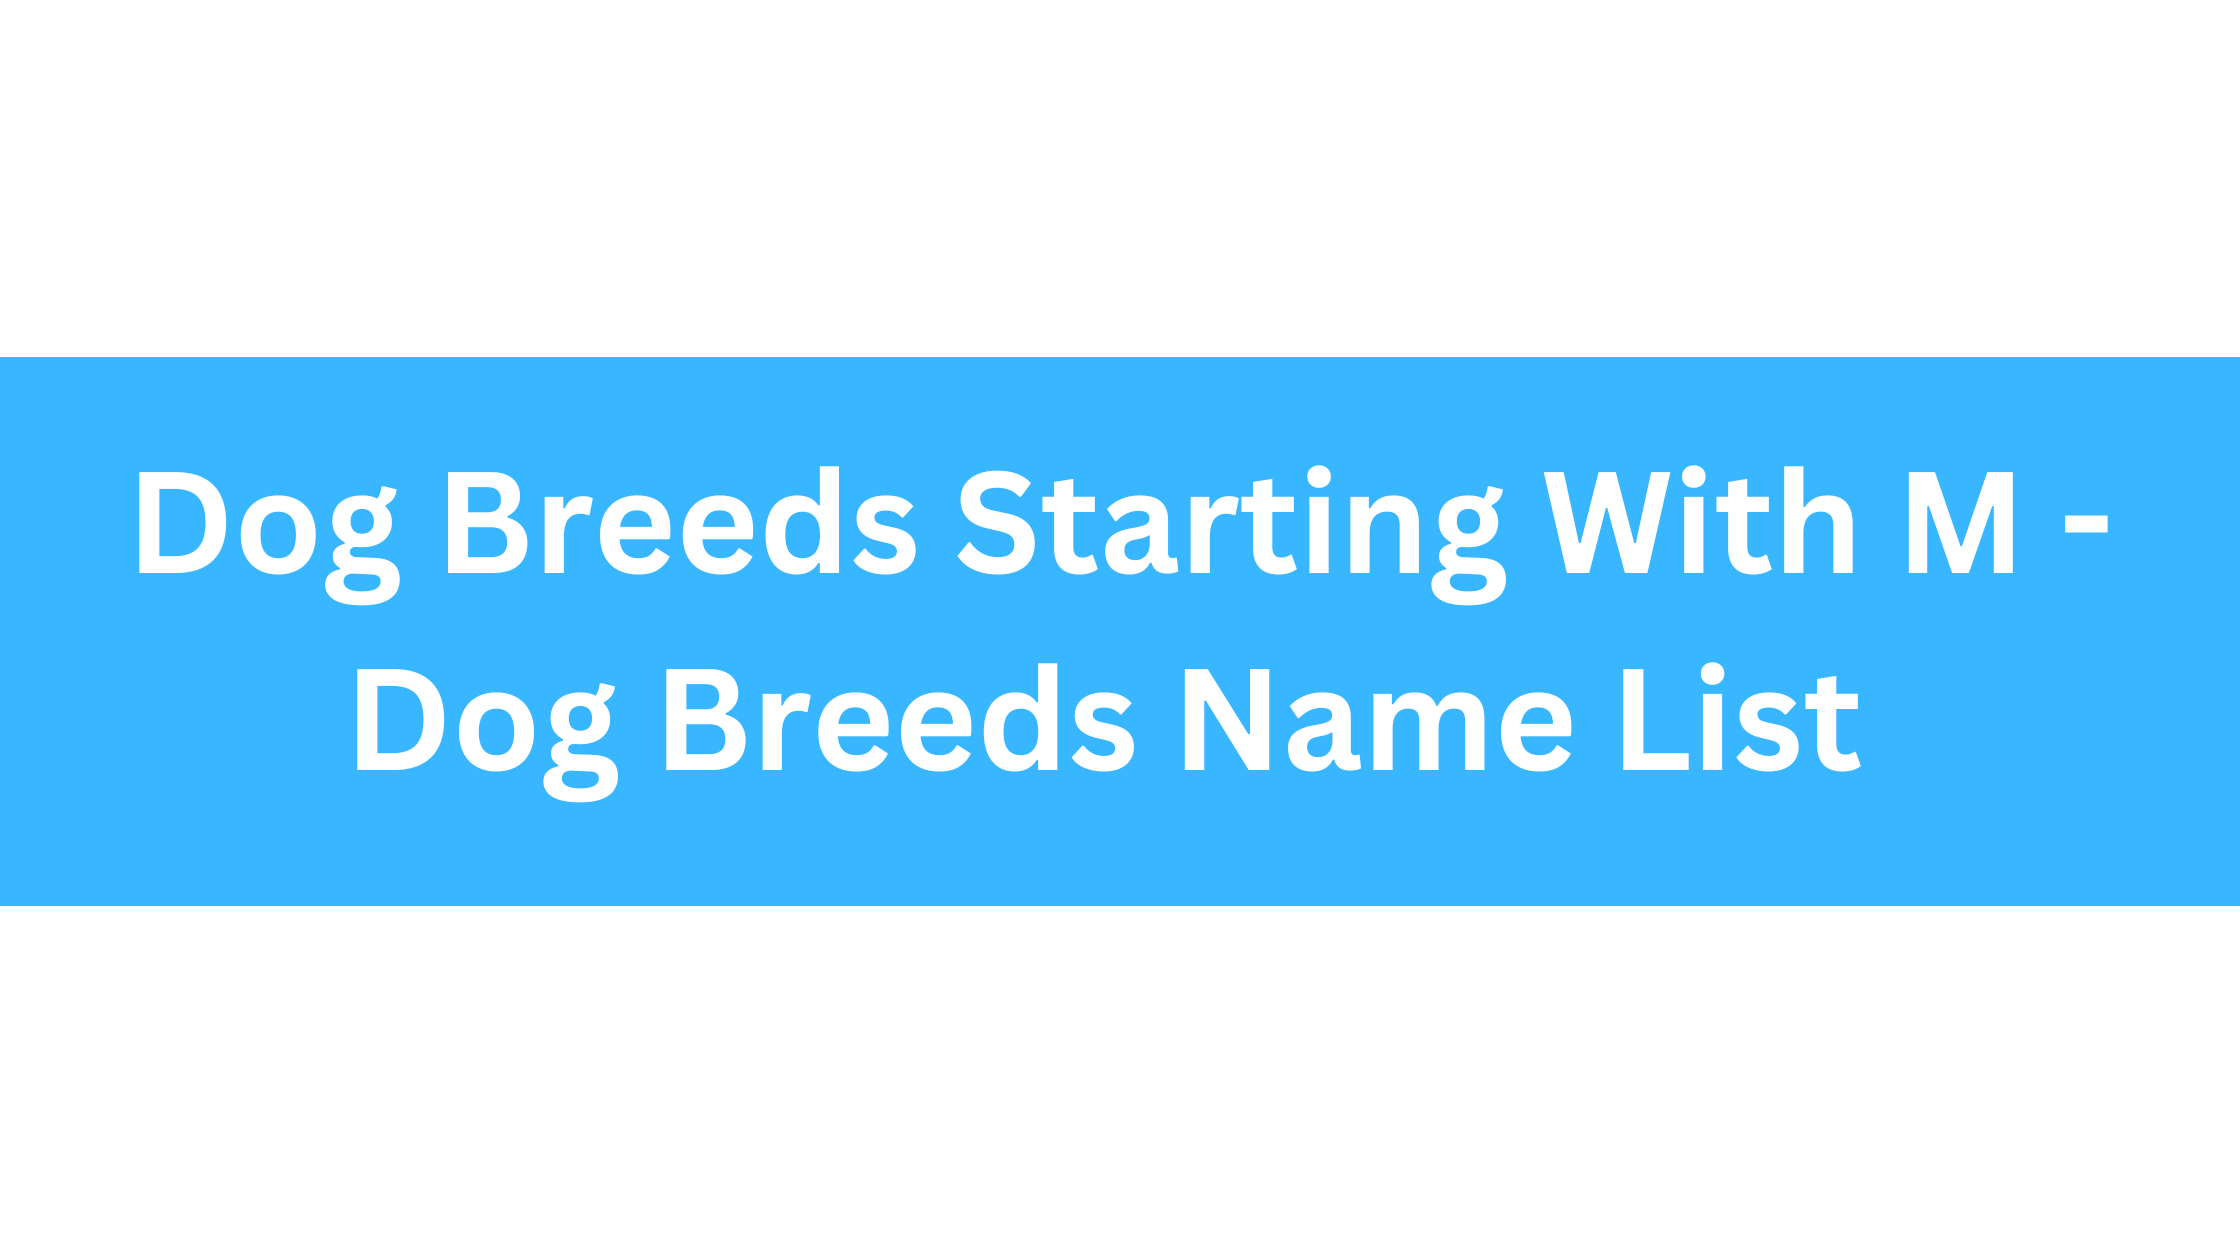 Dog Breeds Starting With M